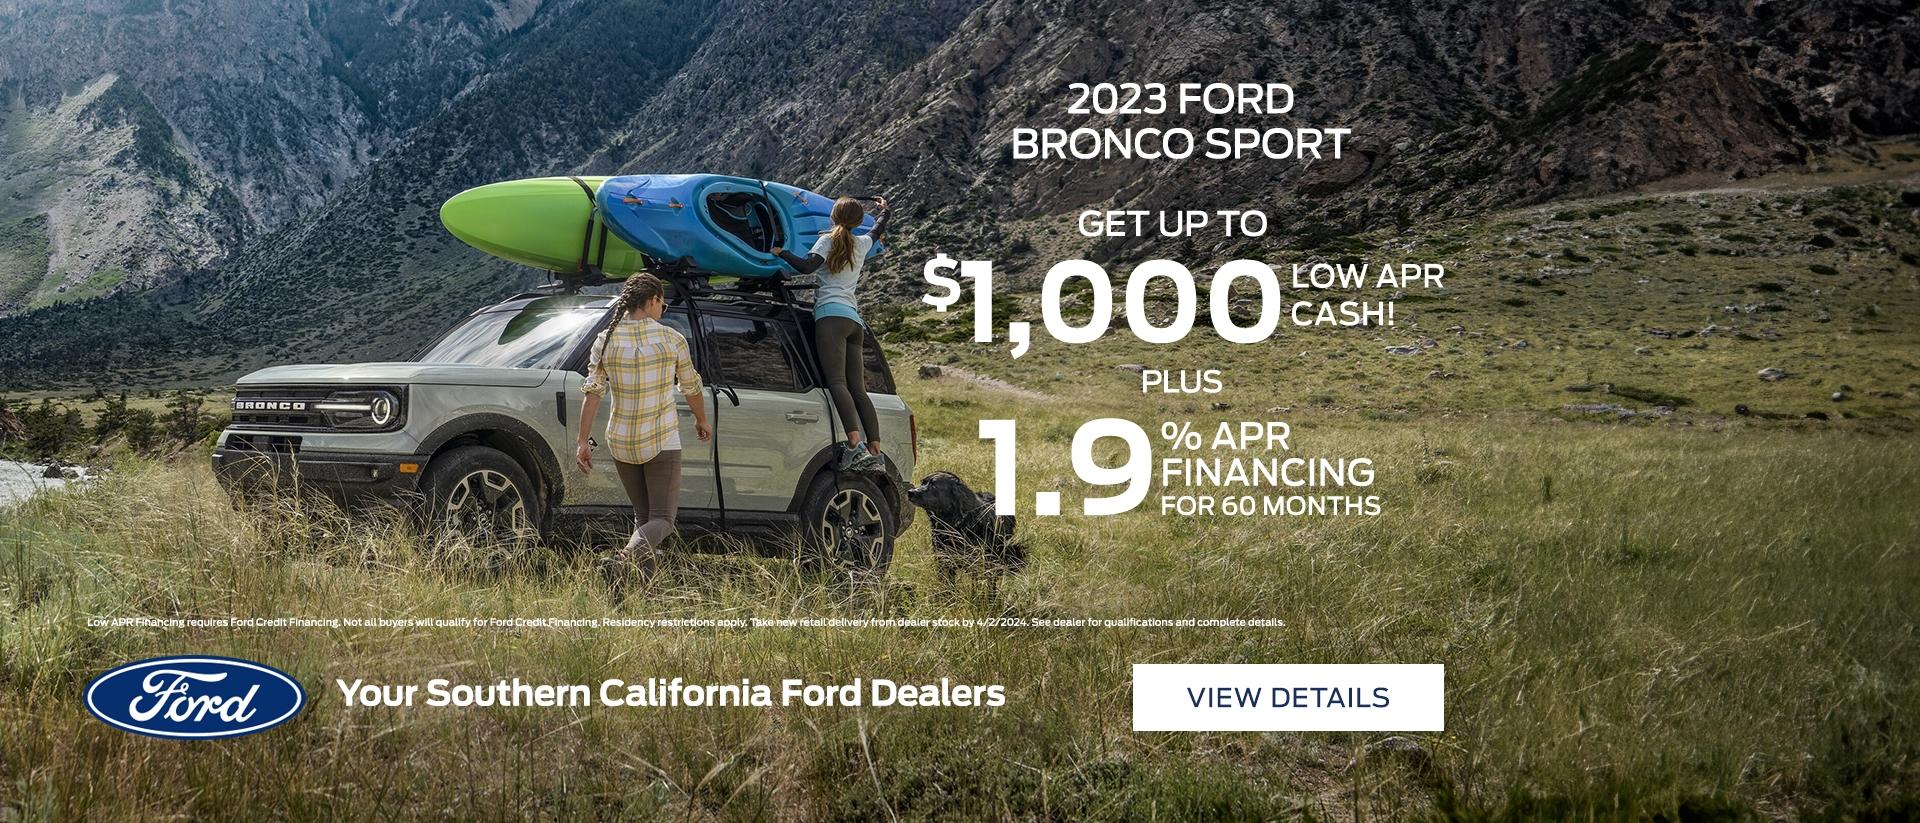 2023 Ford Bronco Sport Purchase Offer | Southern California Ford Dealers